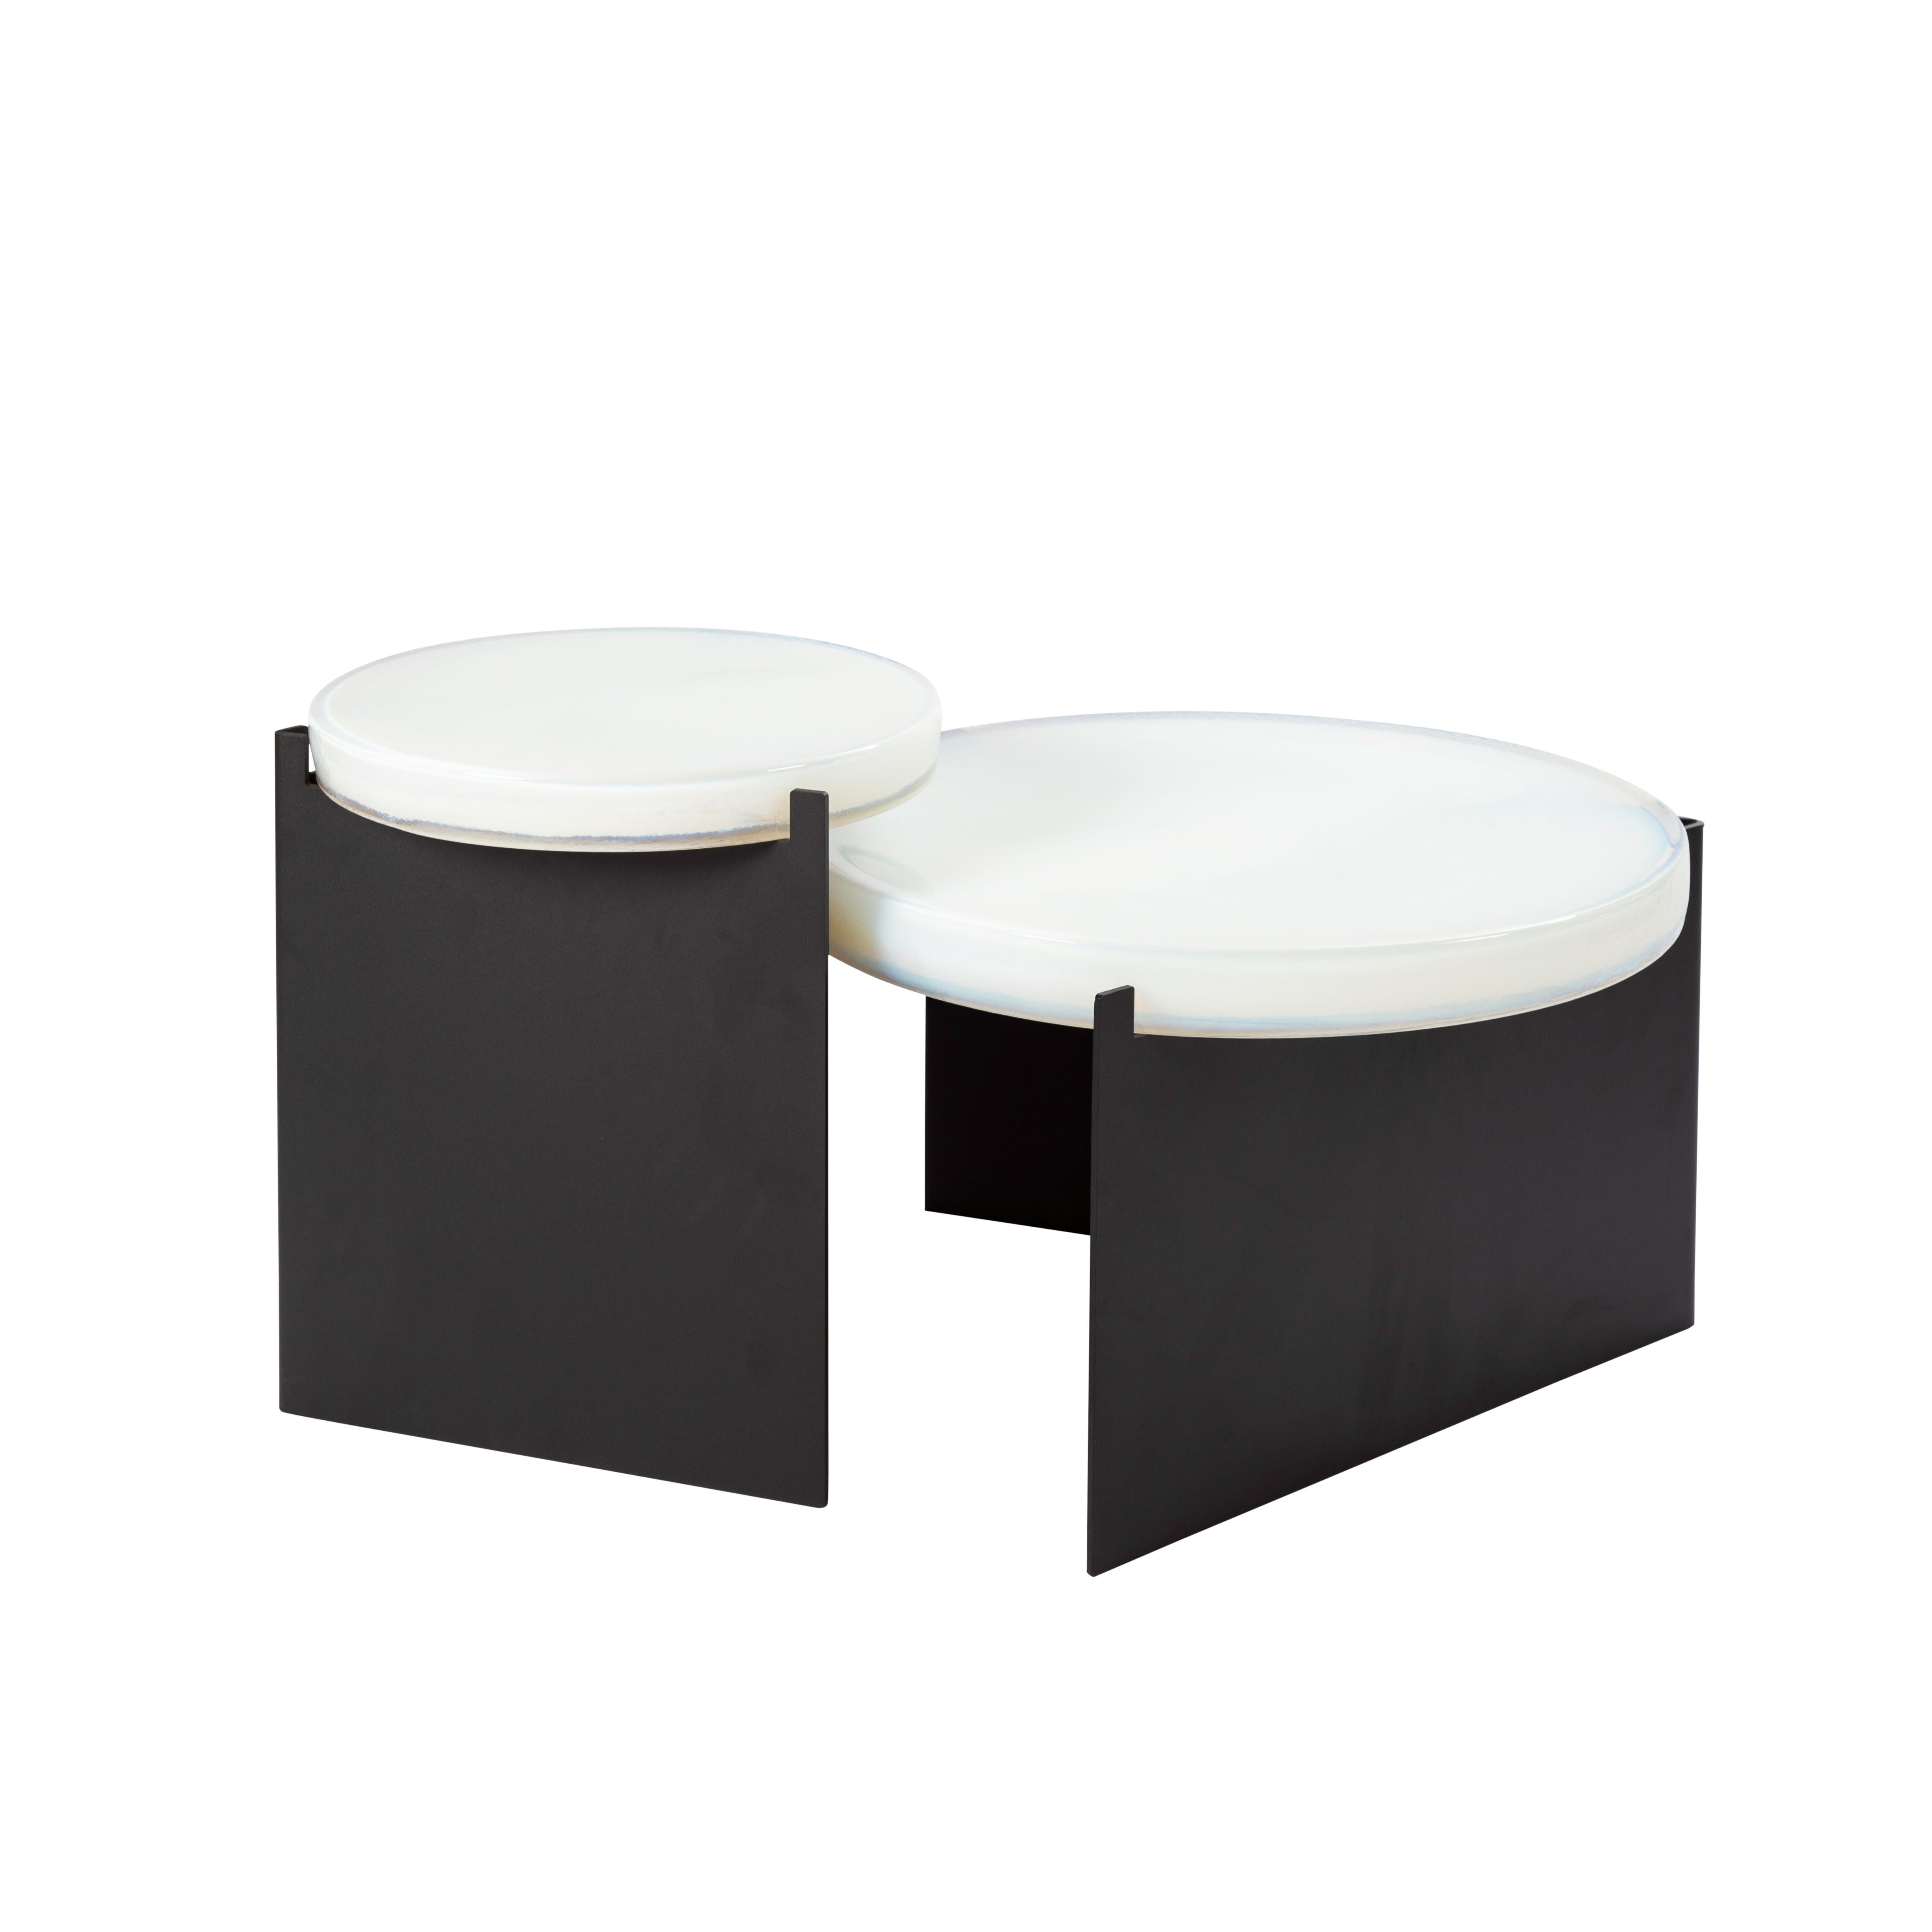 German Alwa One Big Black Coffee Table by Pulpo For Sale